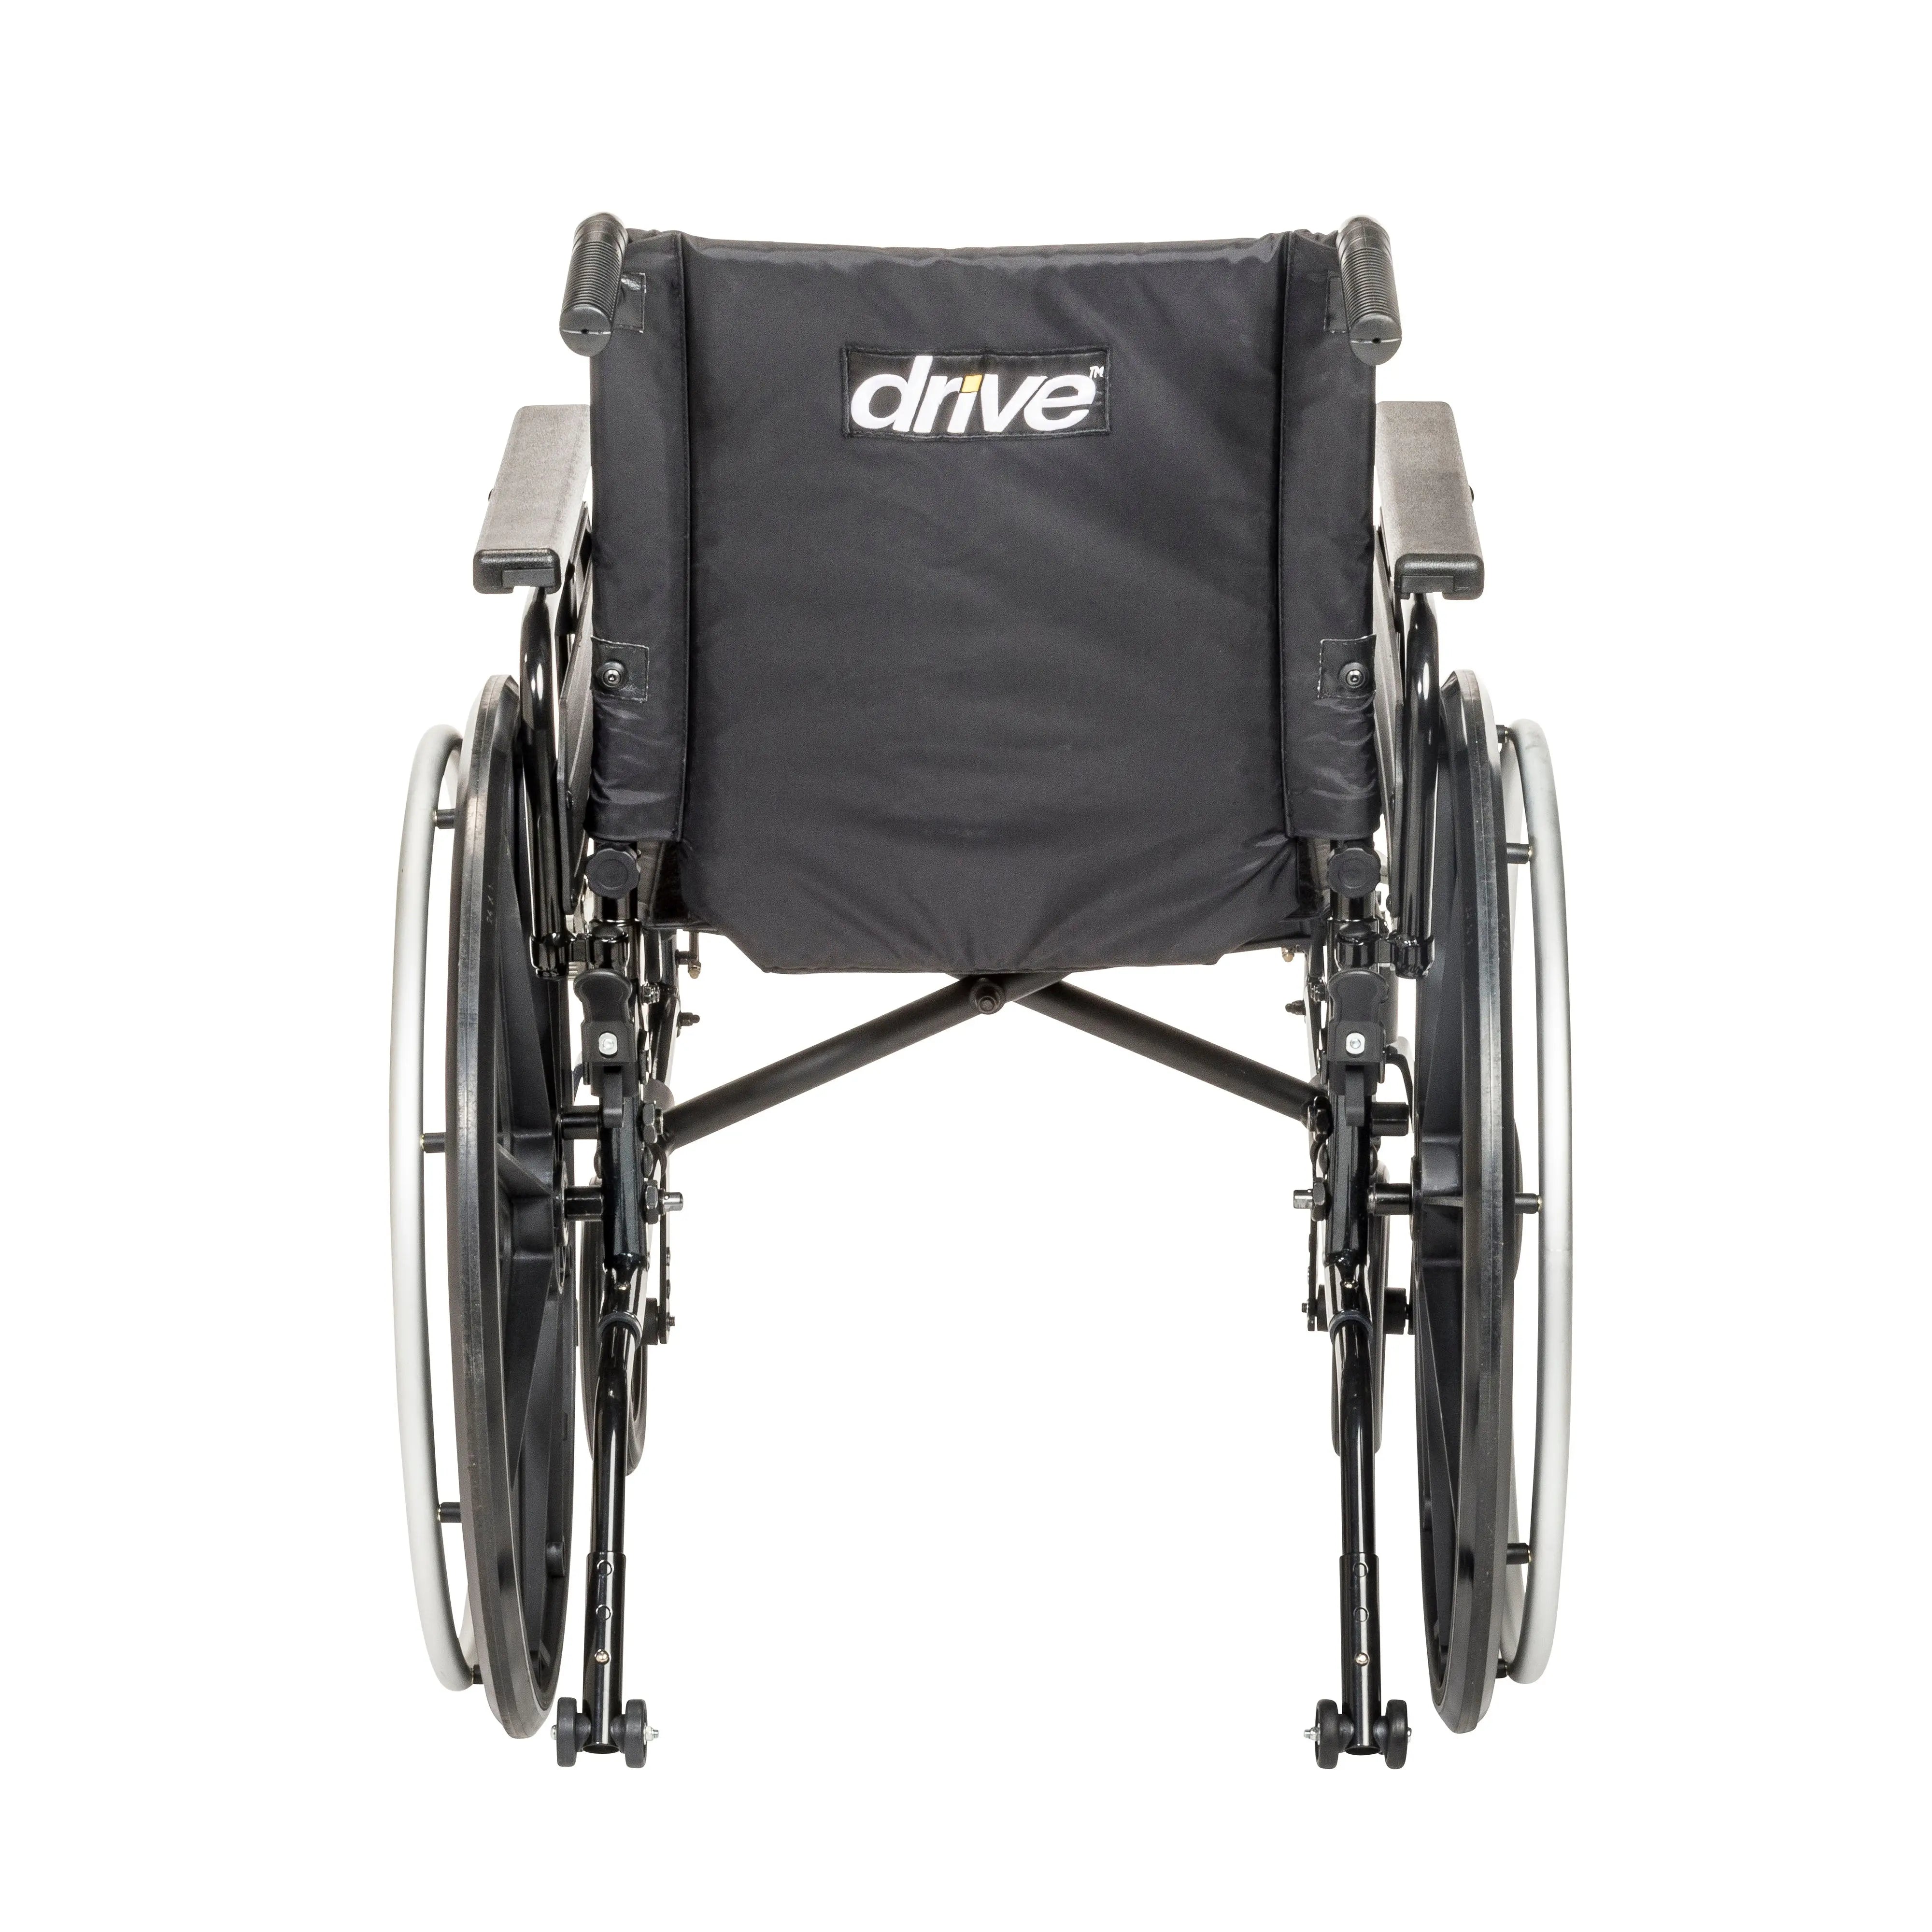 Viper Plus GT Wheelchair with Universal Armrests